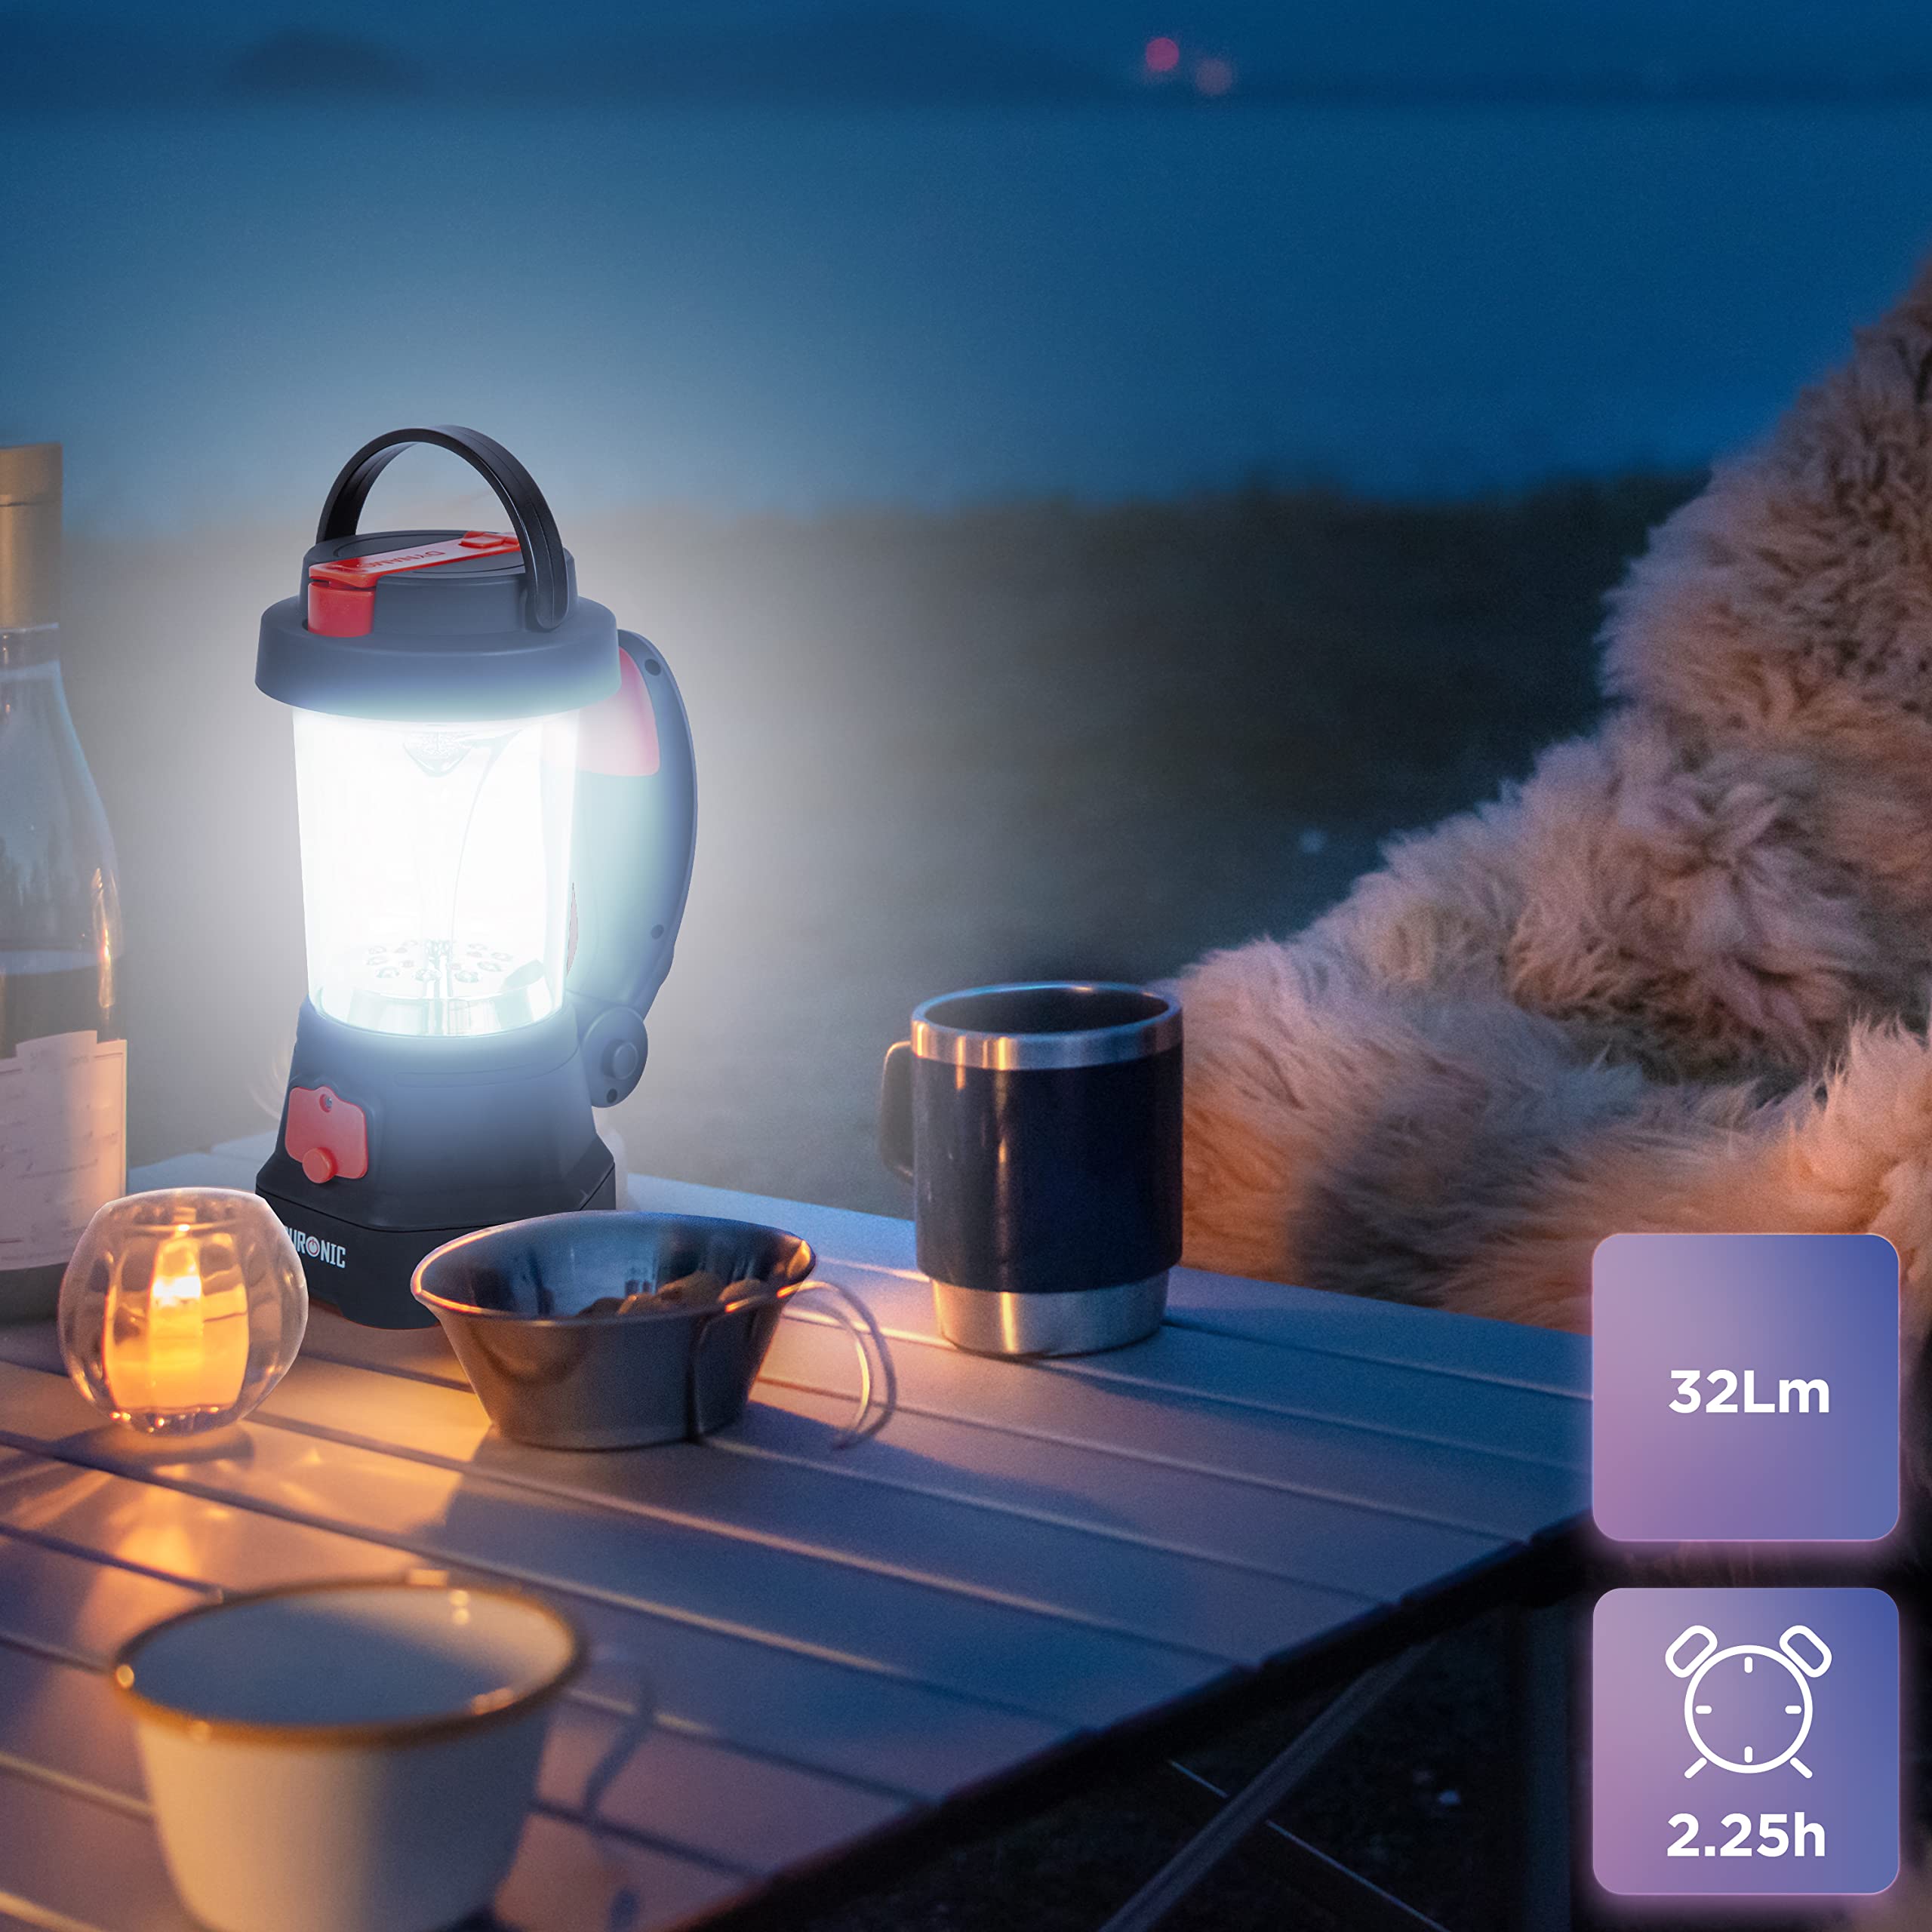 Duronic Camping Lantern Rechargeable LED Camping Light Hurricane, 5W Wind Up Flashlight Torch Lanterns for Hiking, Wind-up Emergency Light with 3 Light Modes for Outdoor Activities